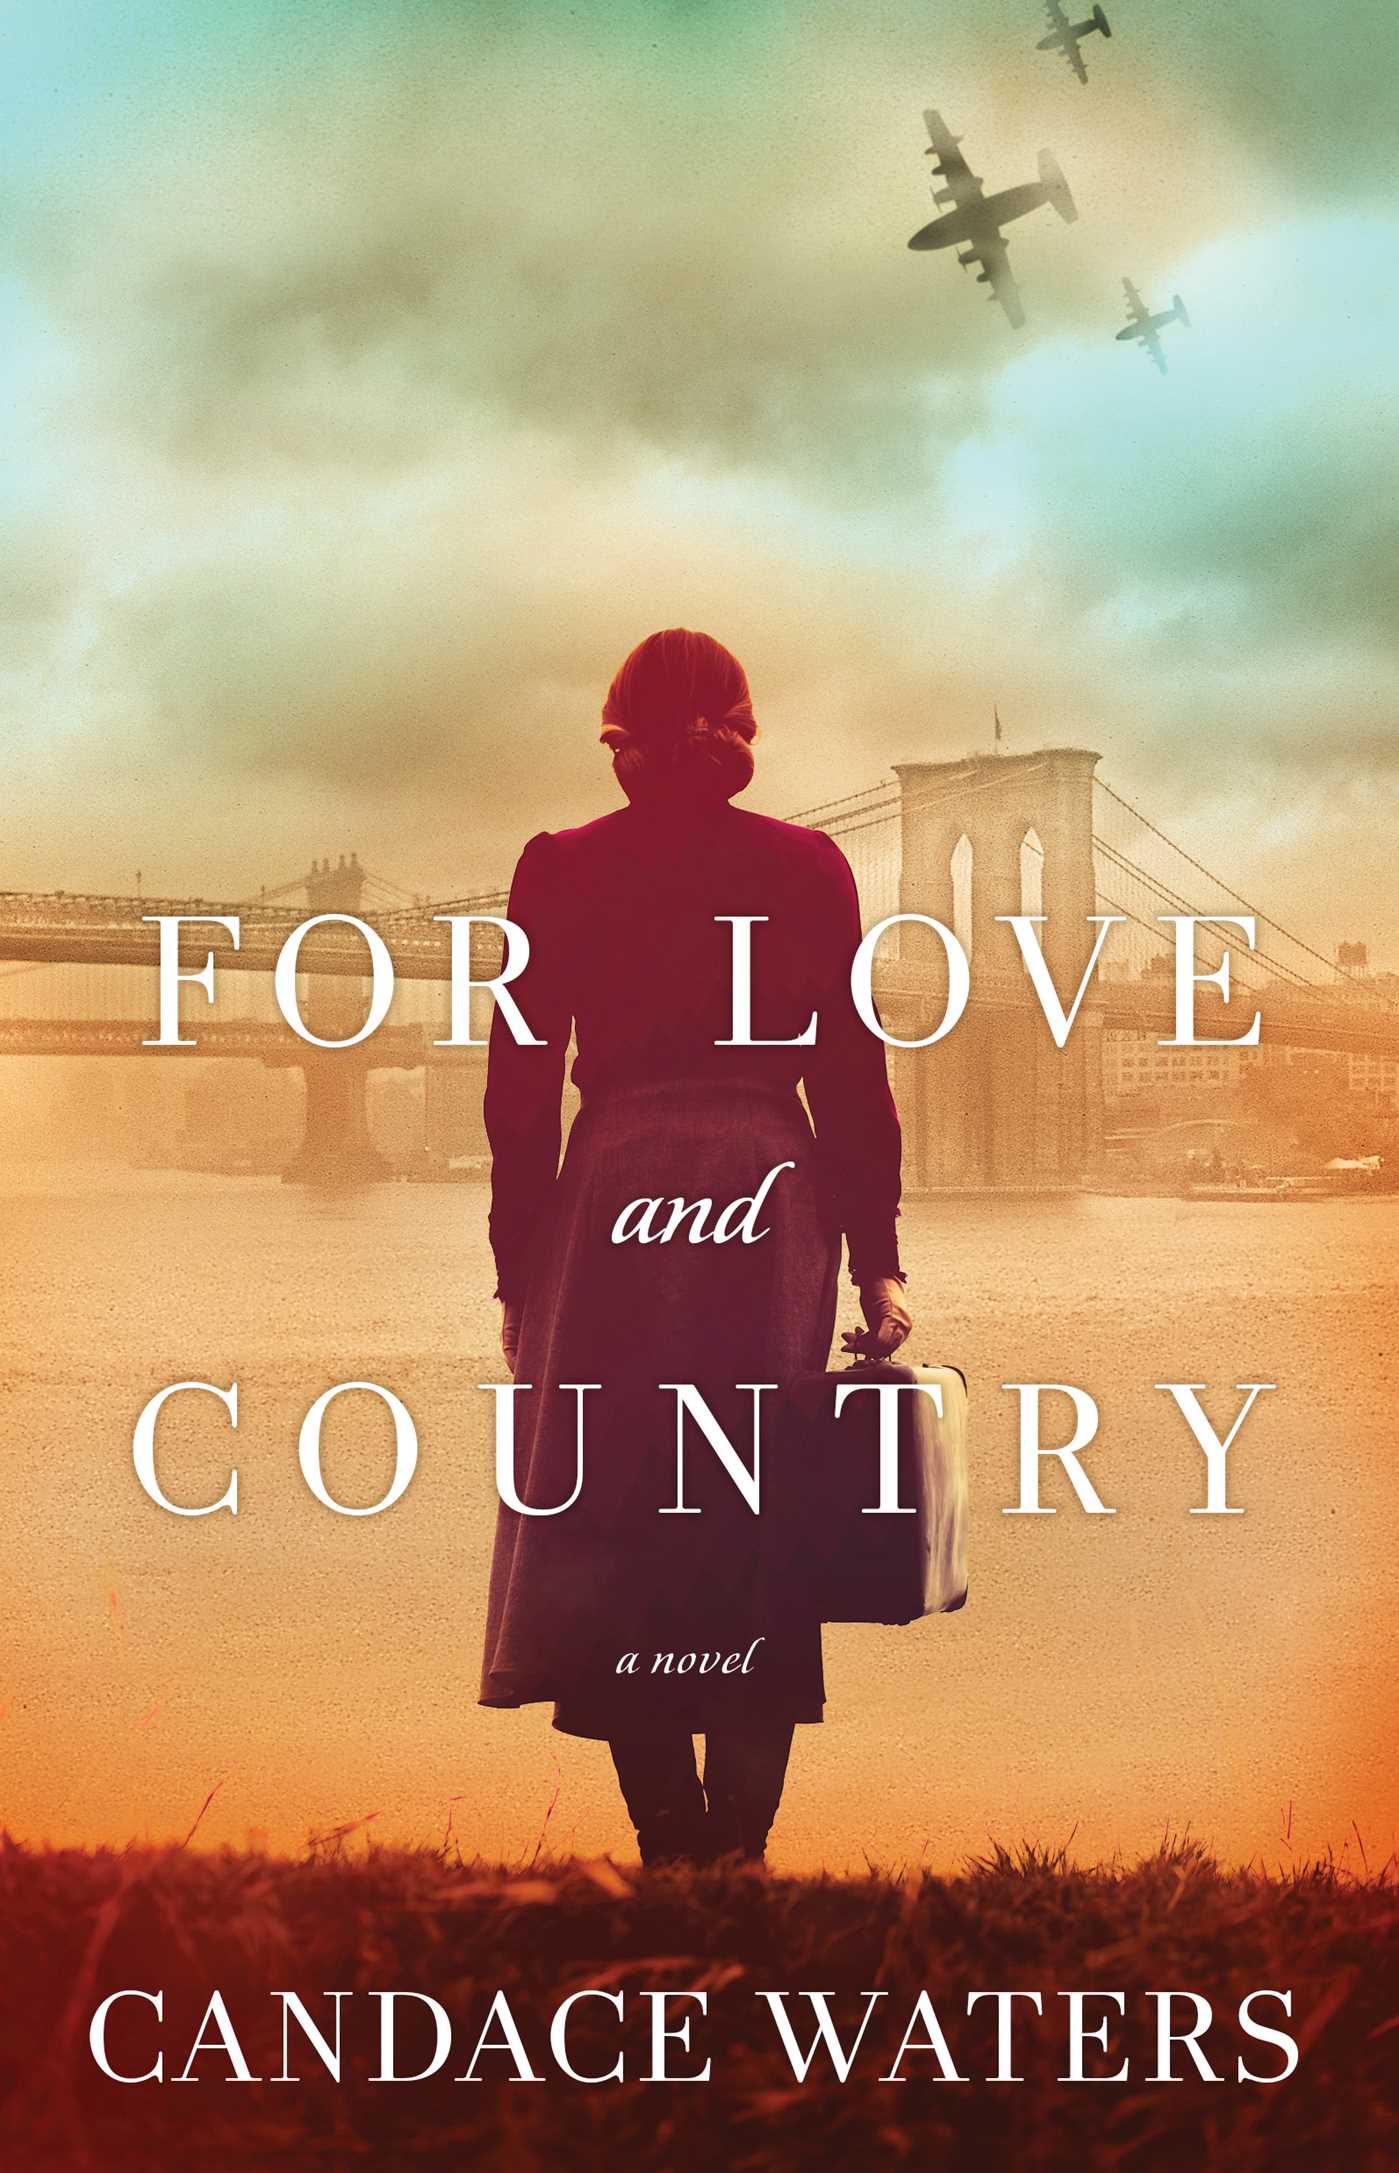 Image for "For Love and Country"